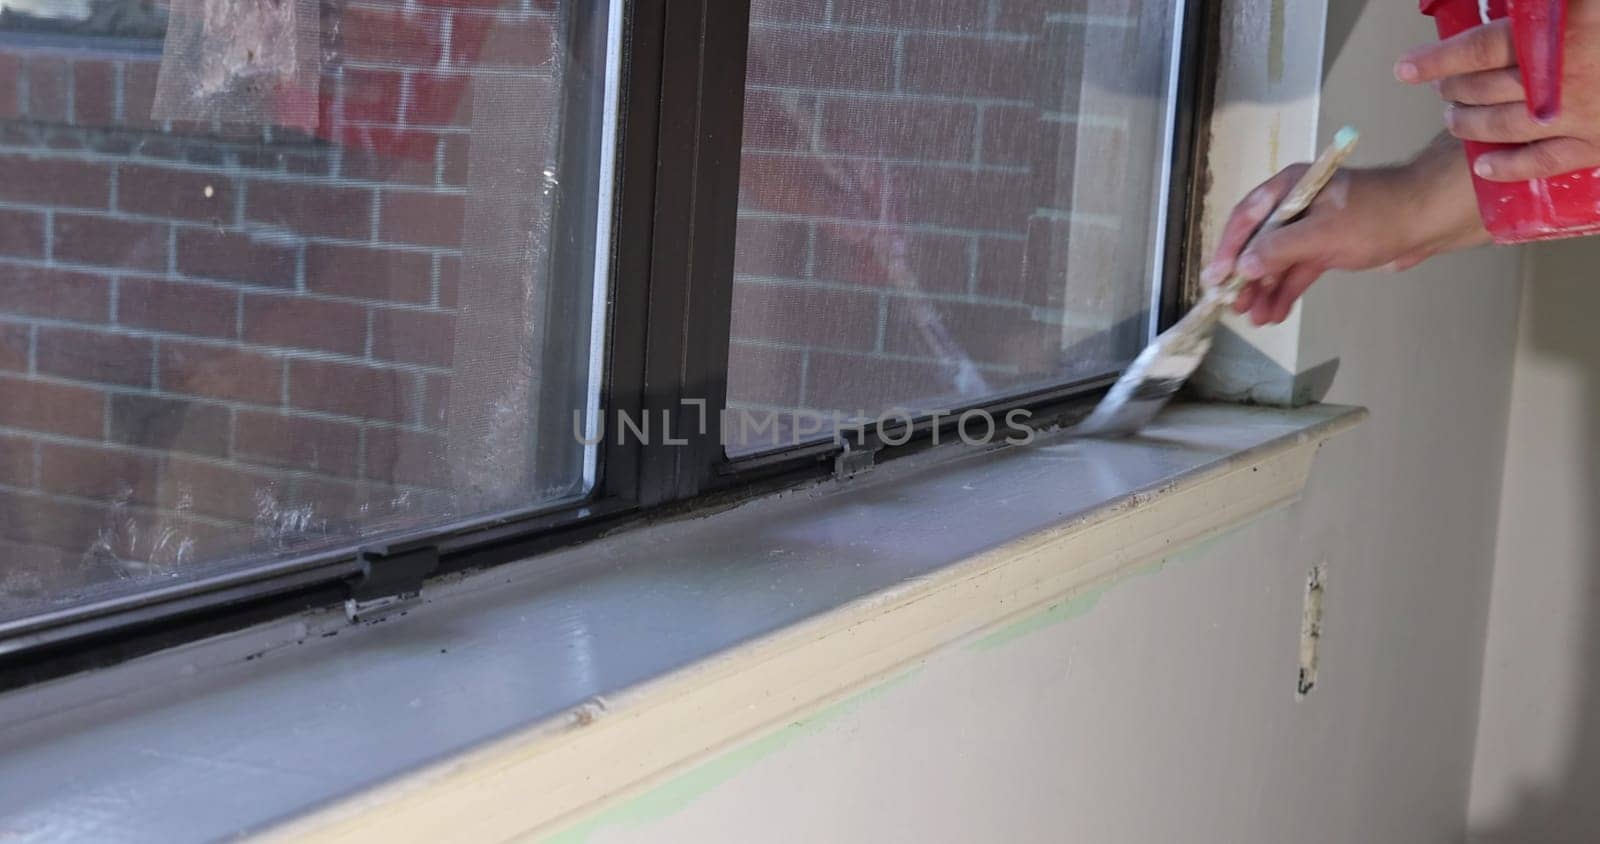 Using paintbrush repairman paints window molding trim with during renovations to an apartment